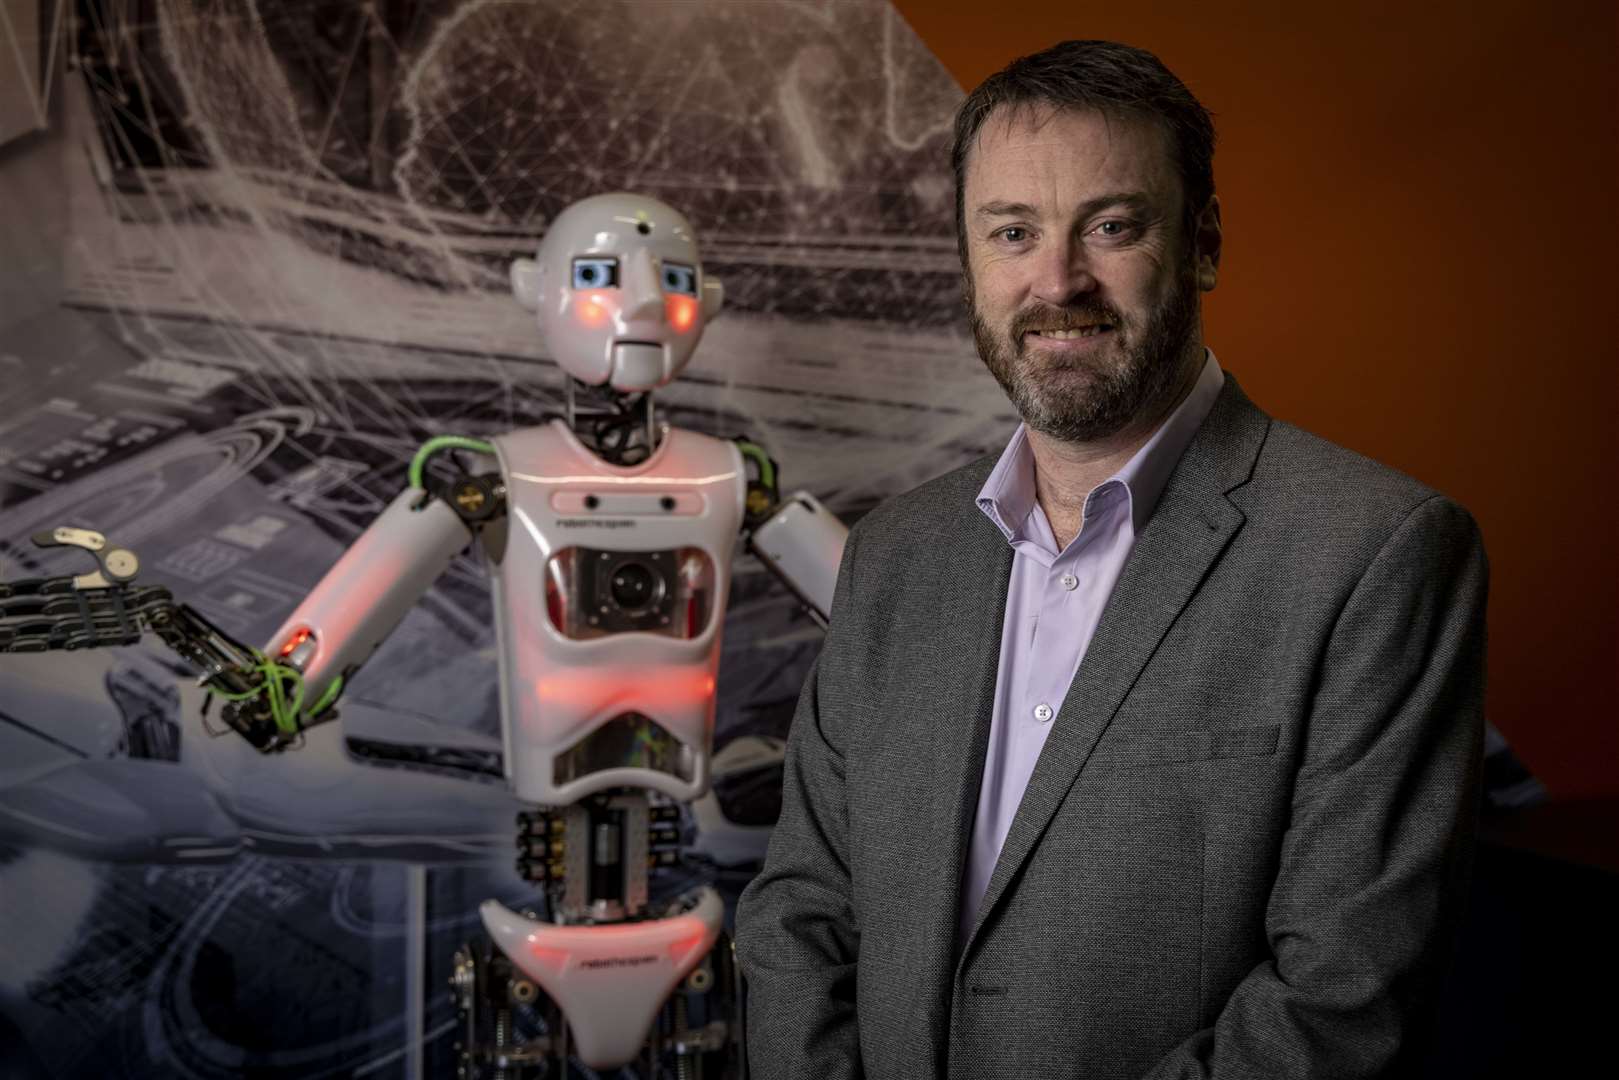 Bryan Snelling with RoboThespian, one of the most popular exhibits at Aberdeen Science Centre.